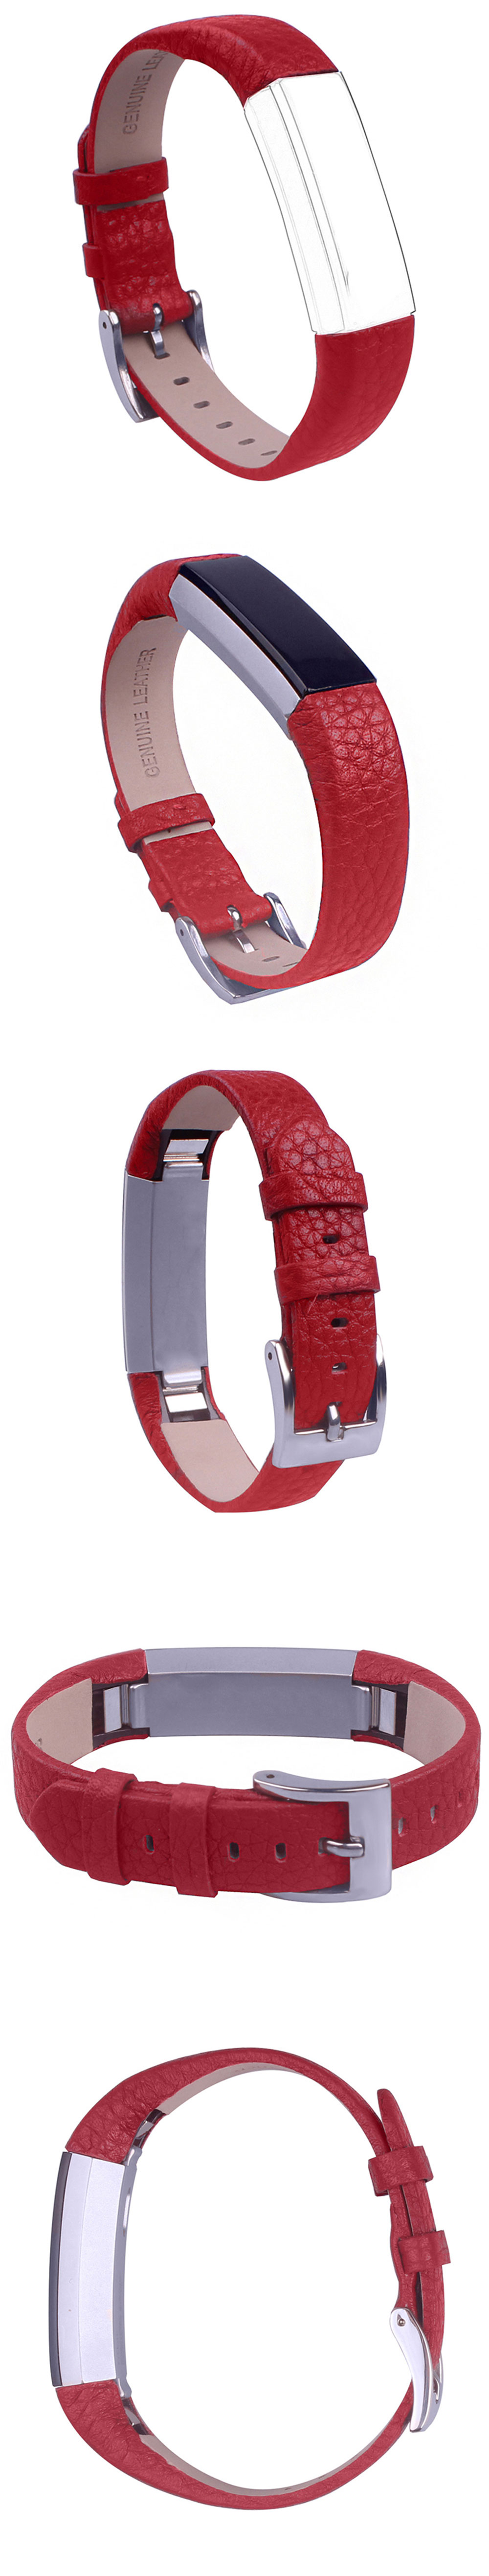 14mm-Watch-Band-Colorful-Genuine-Leather-Strap-Replacement-for-Fitbit-Alta-1289474